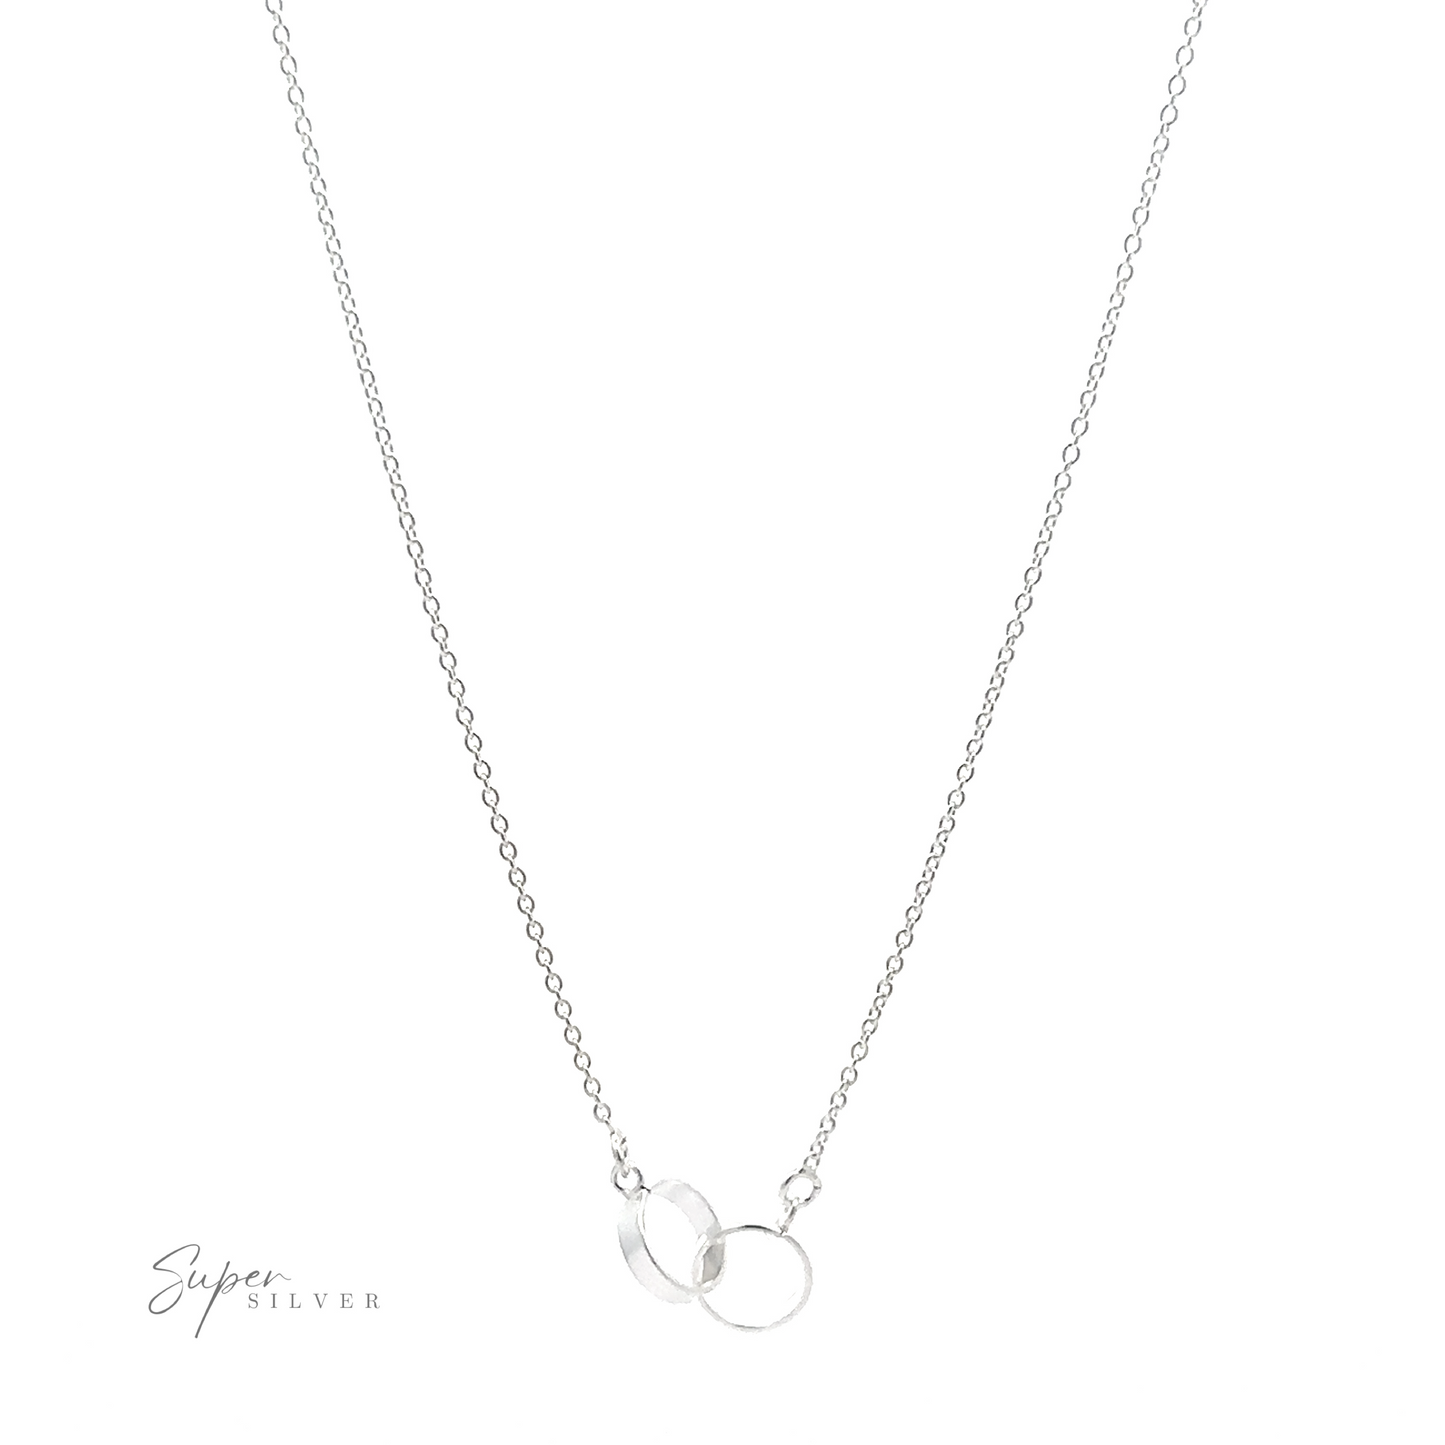 A Double Circle Necklace with a delicate chain features two interlocking rings as a pendant, symbolizing an eternal bond. The double-circle necklace is thin and minimalistic, perfect for everyday wear. The logo "Super Silver" appears in the bottom left corner.